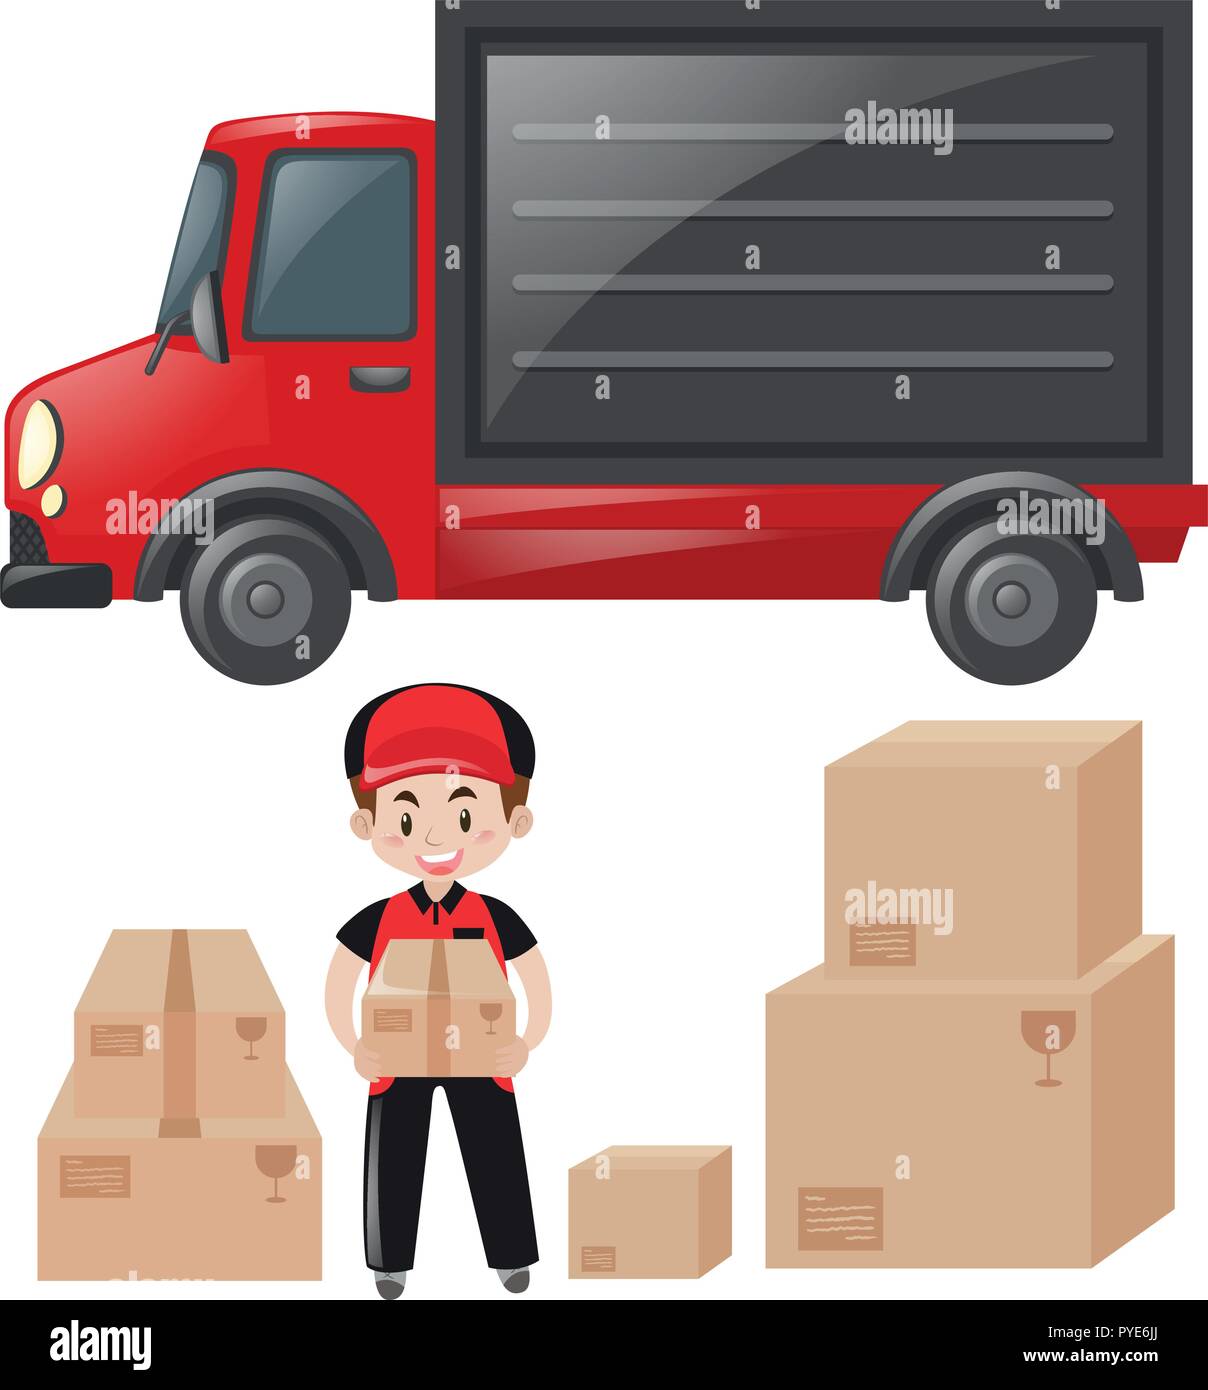 Set of mailman and delivery service illustration Stock Vector